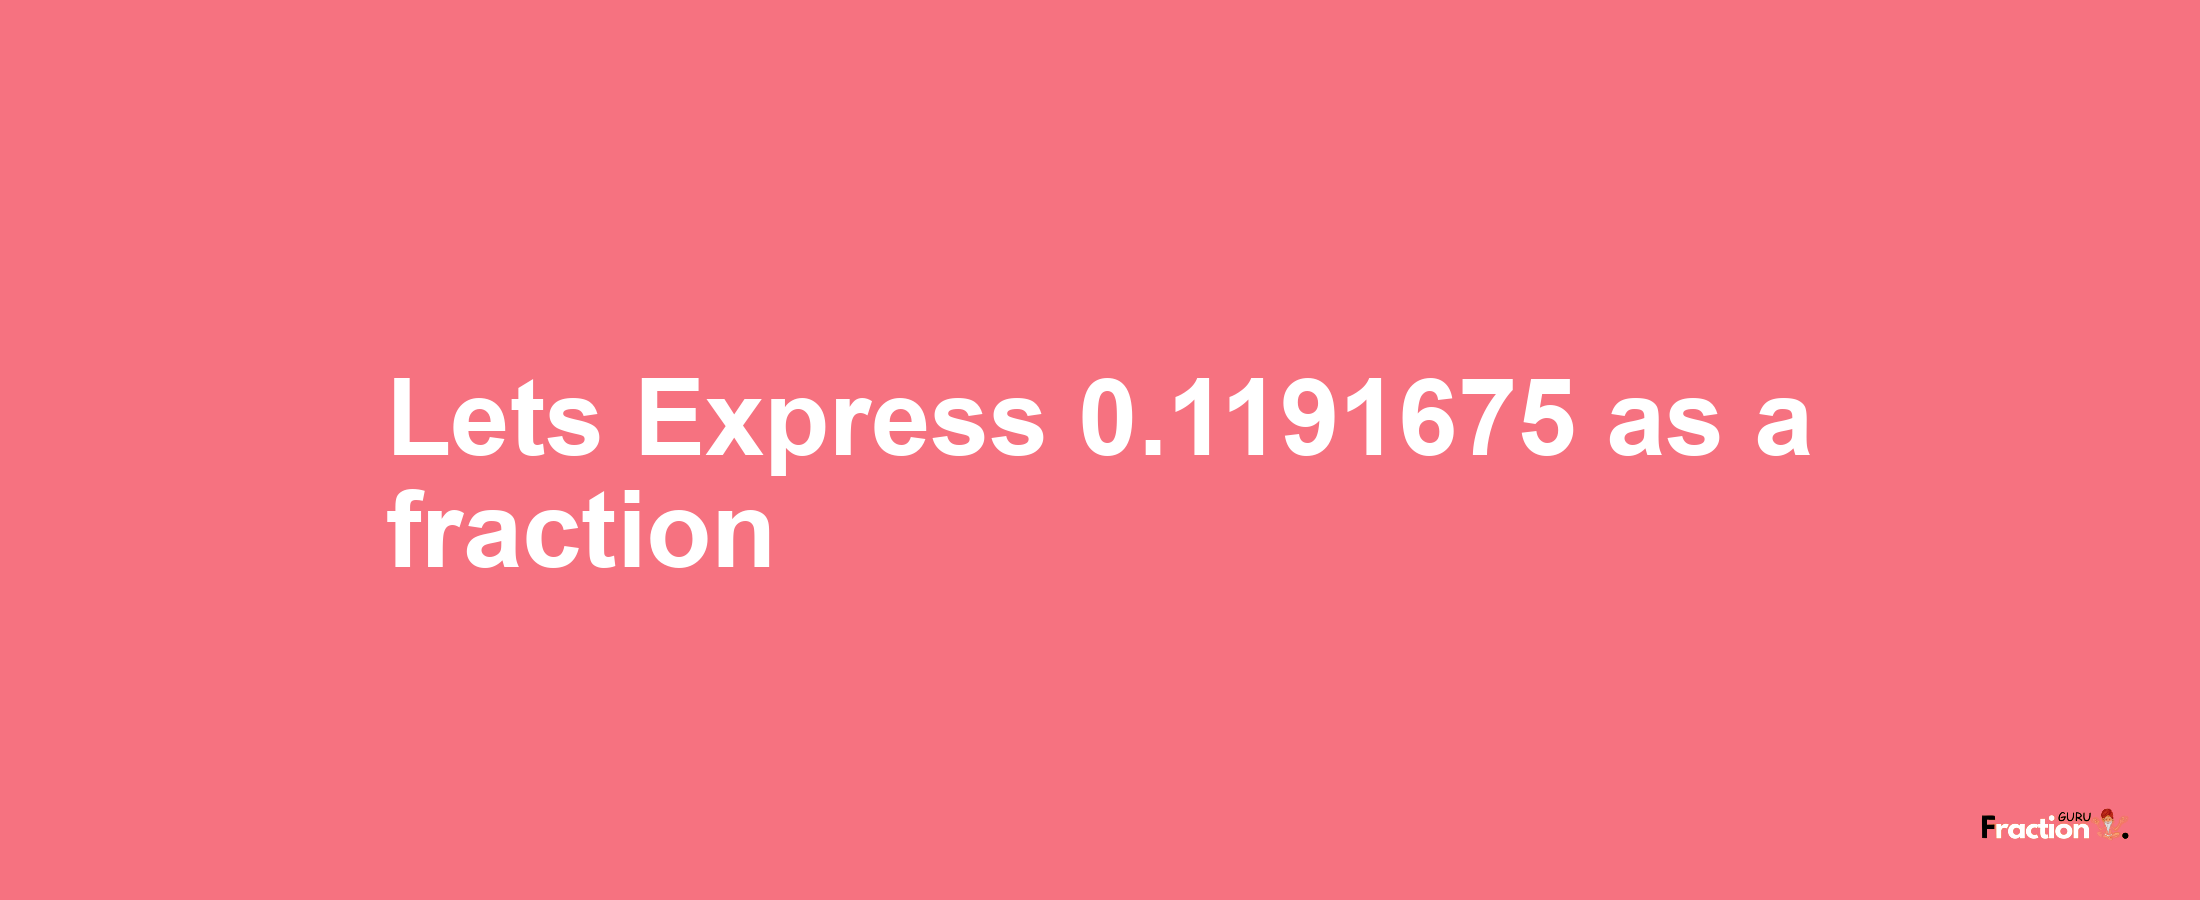 Lets Express 0.1191675 as afraction